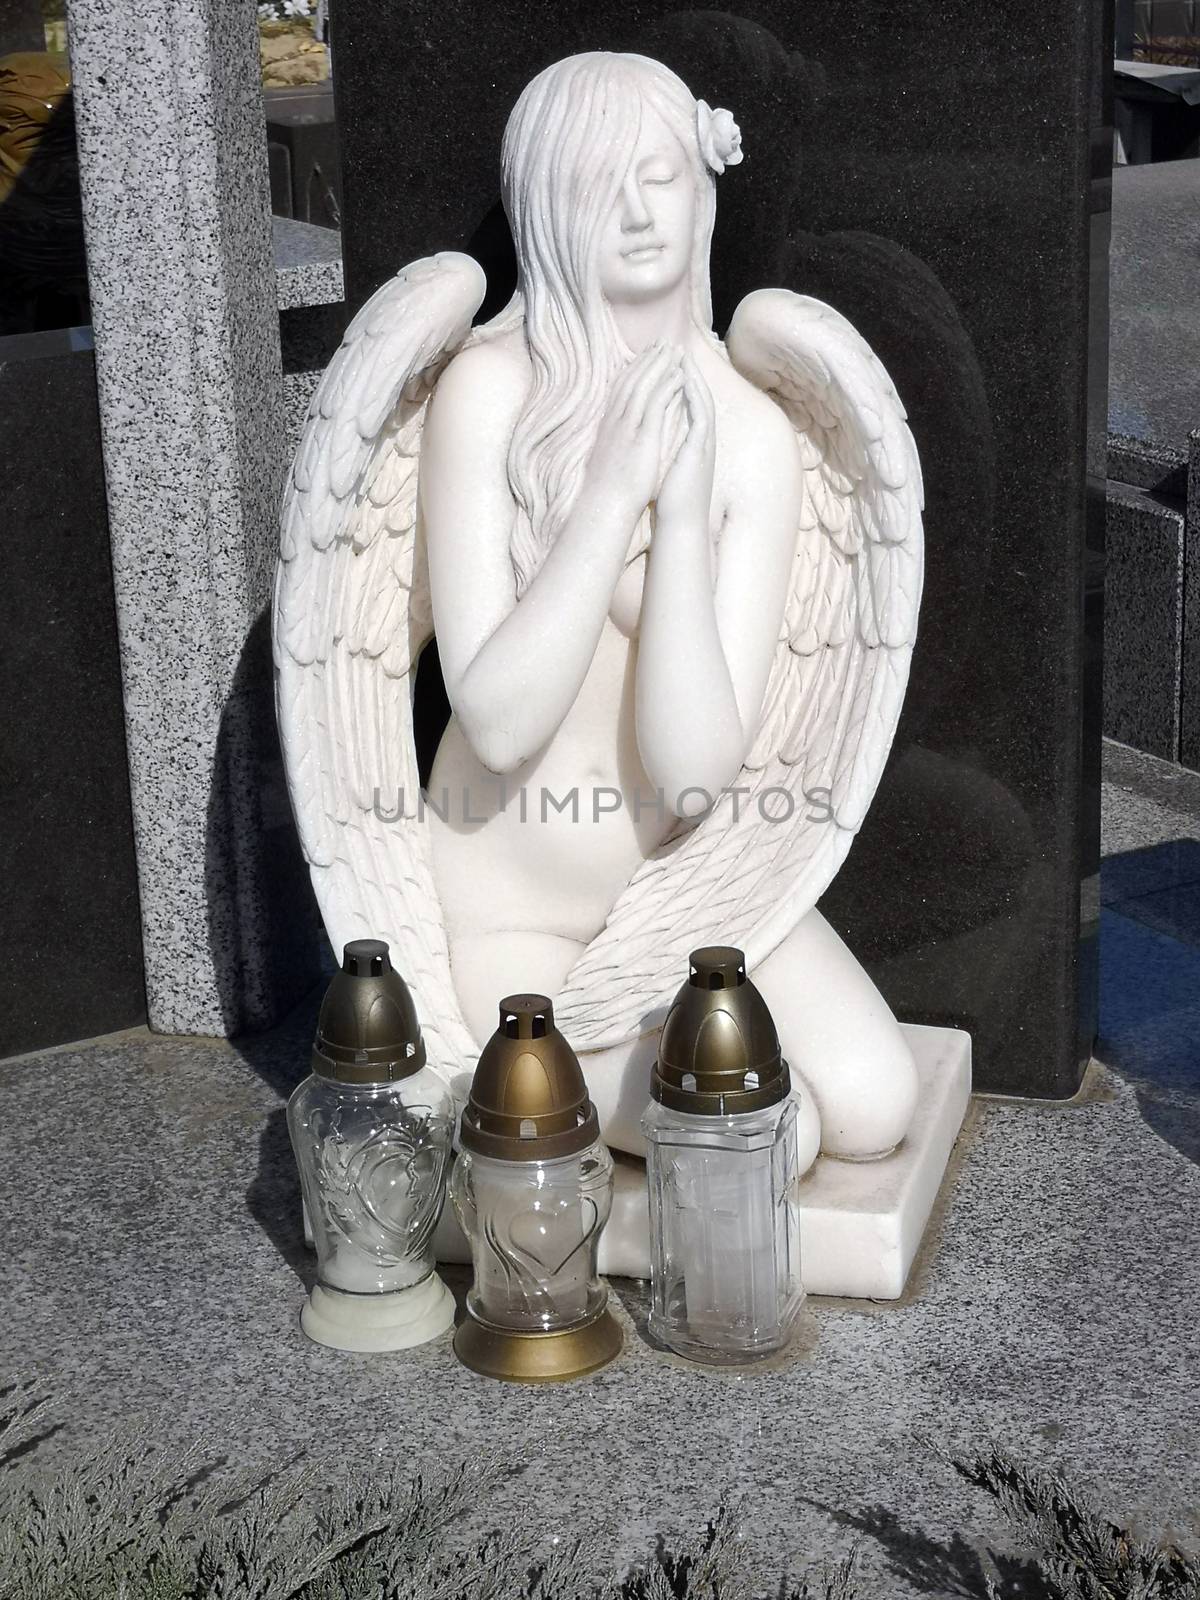 Cemetery monument in the form of an angel in front of her are lomads by 977_ReX_977